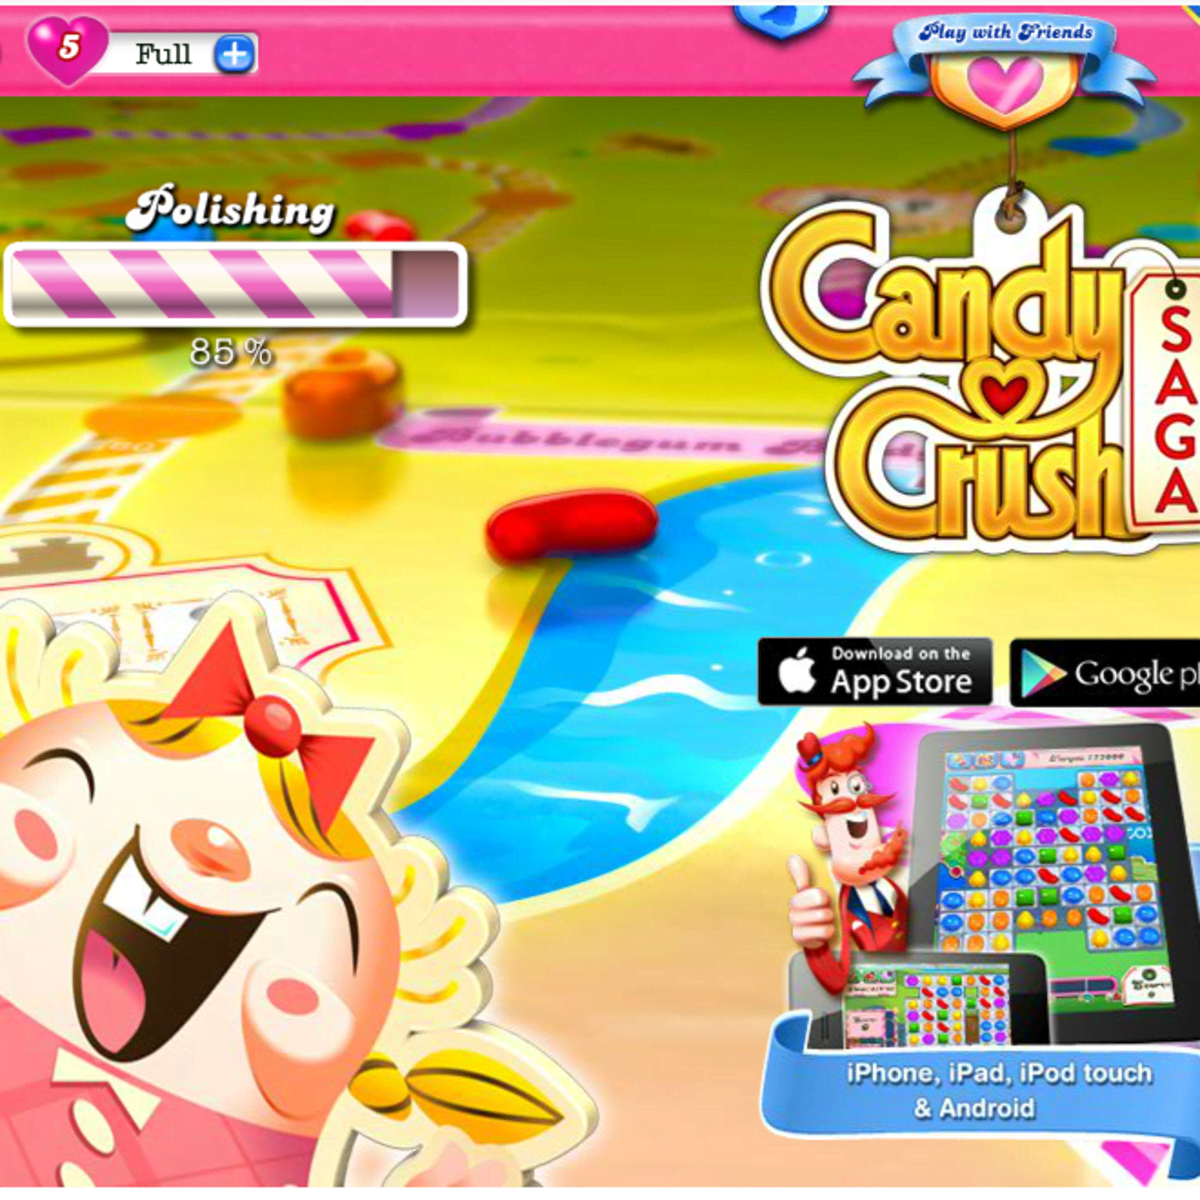 how to send lives & extra movies on candy crush